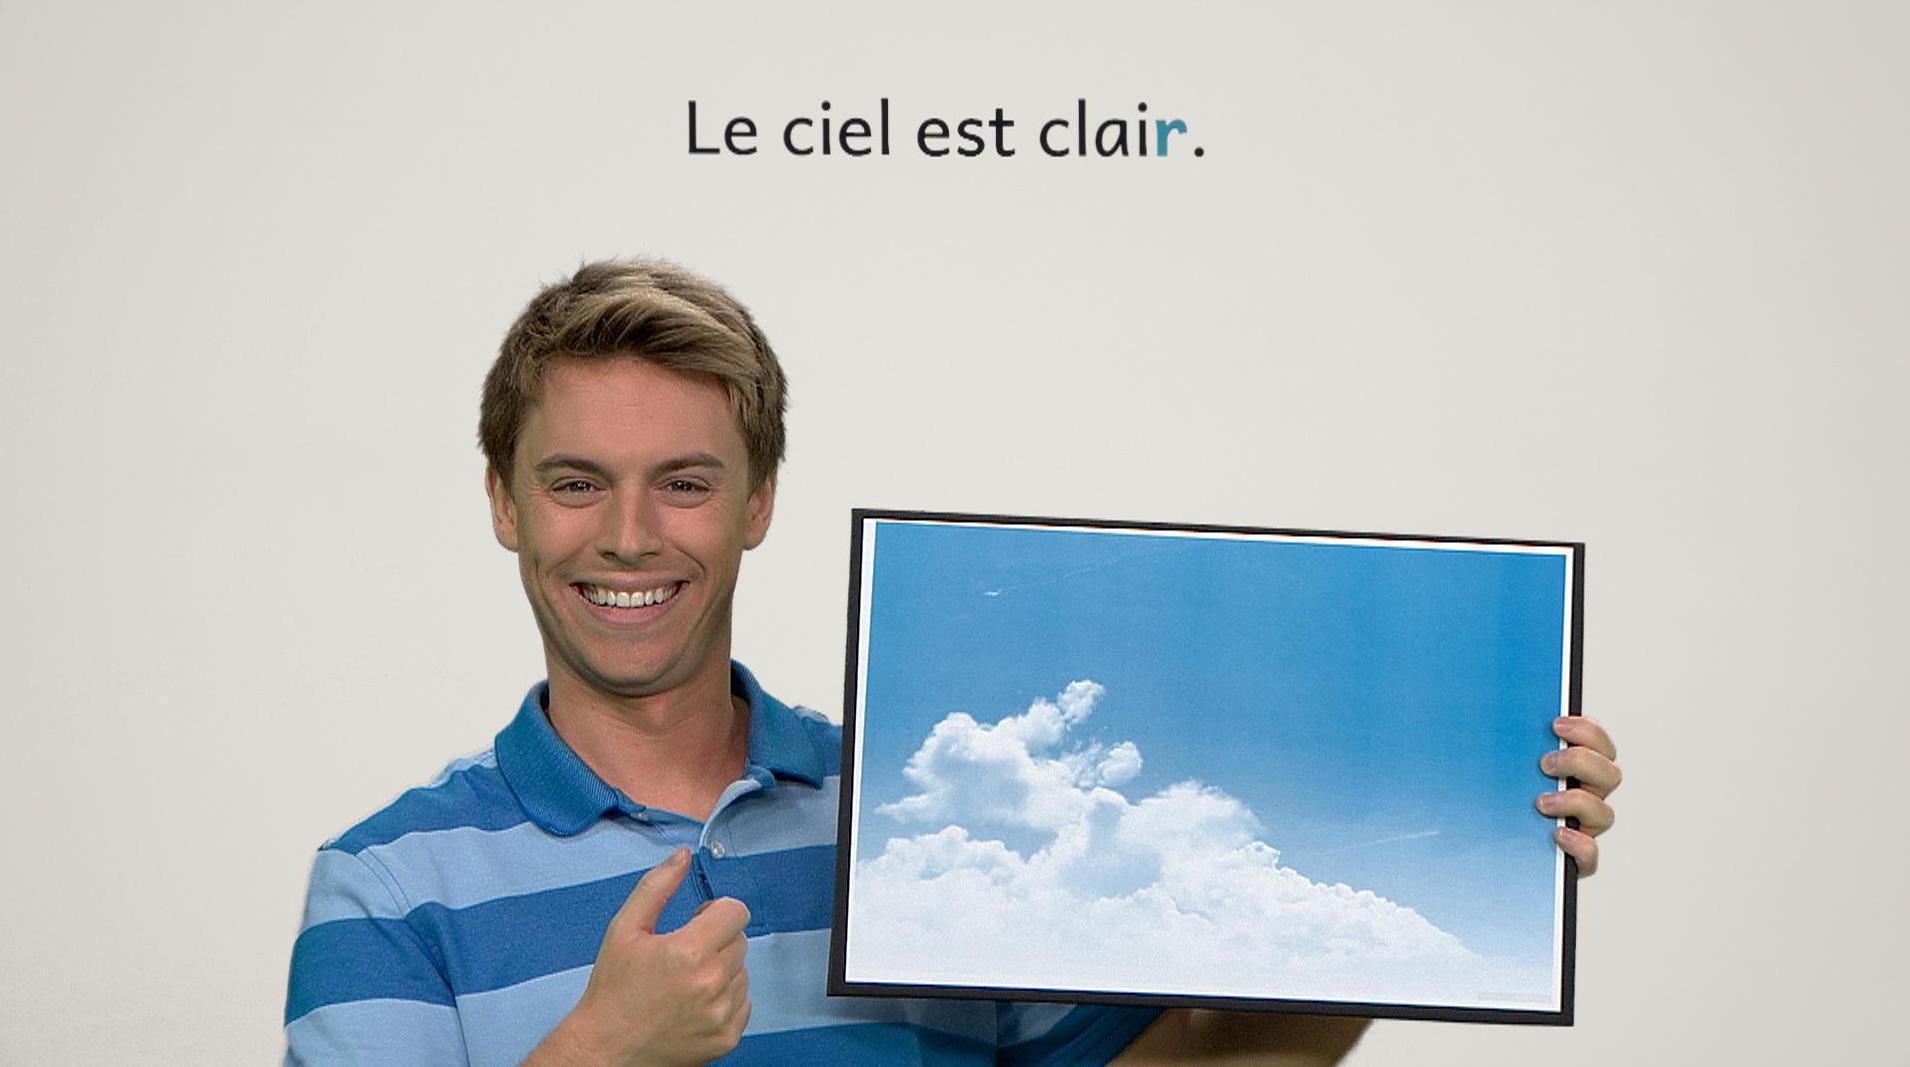 Clair, claire, clairs